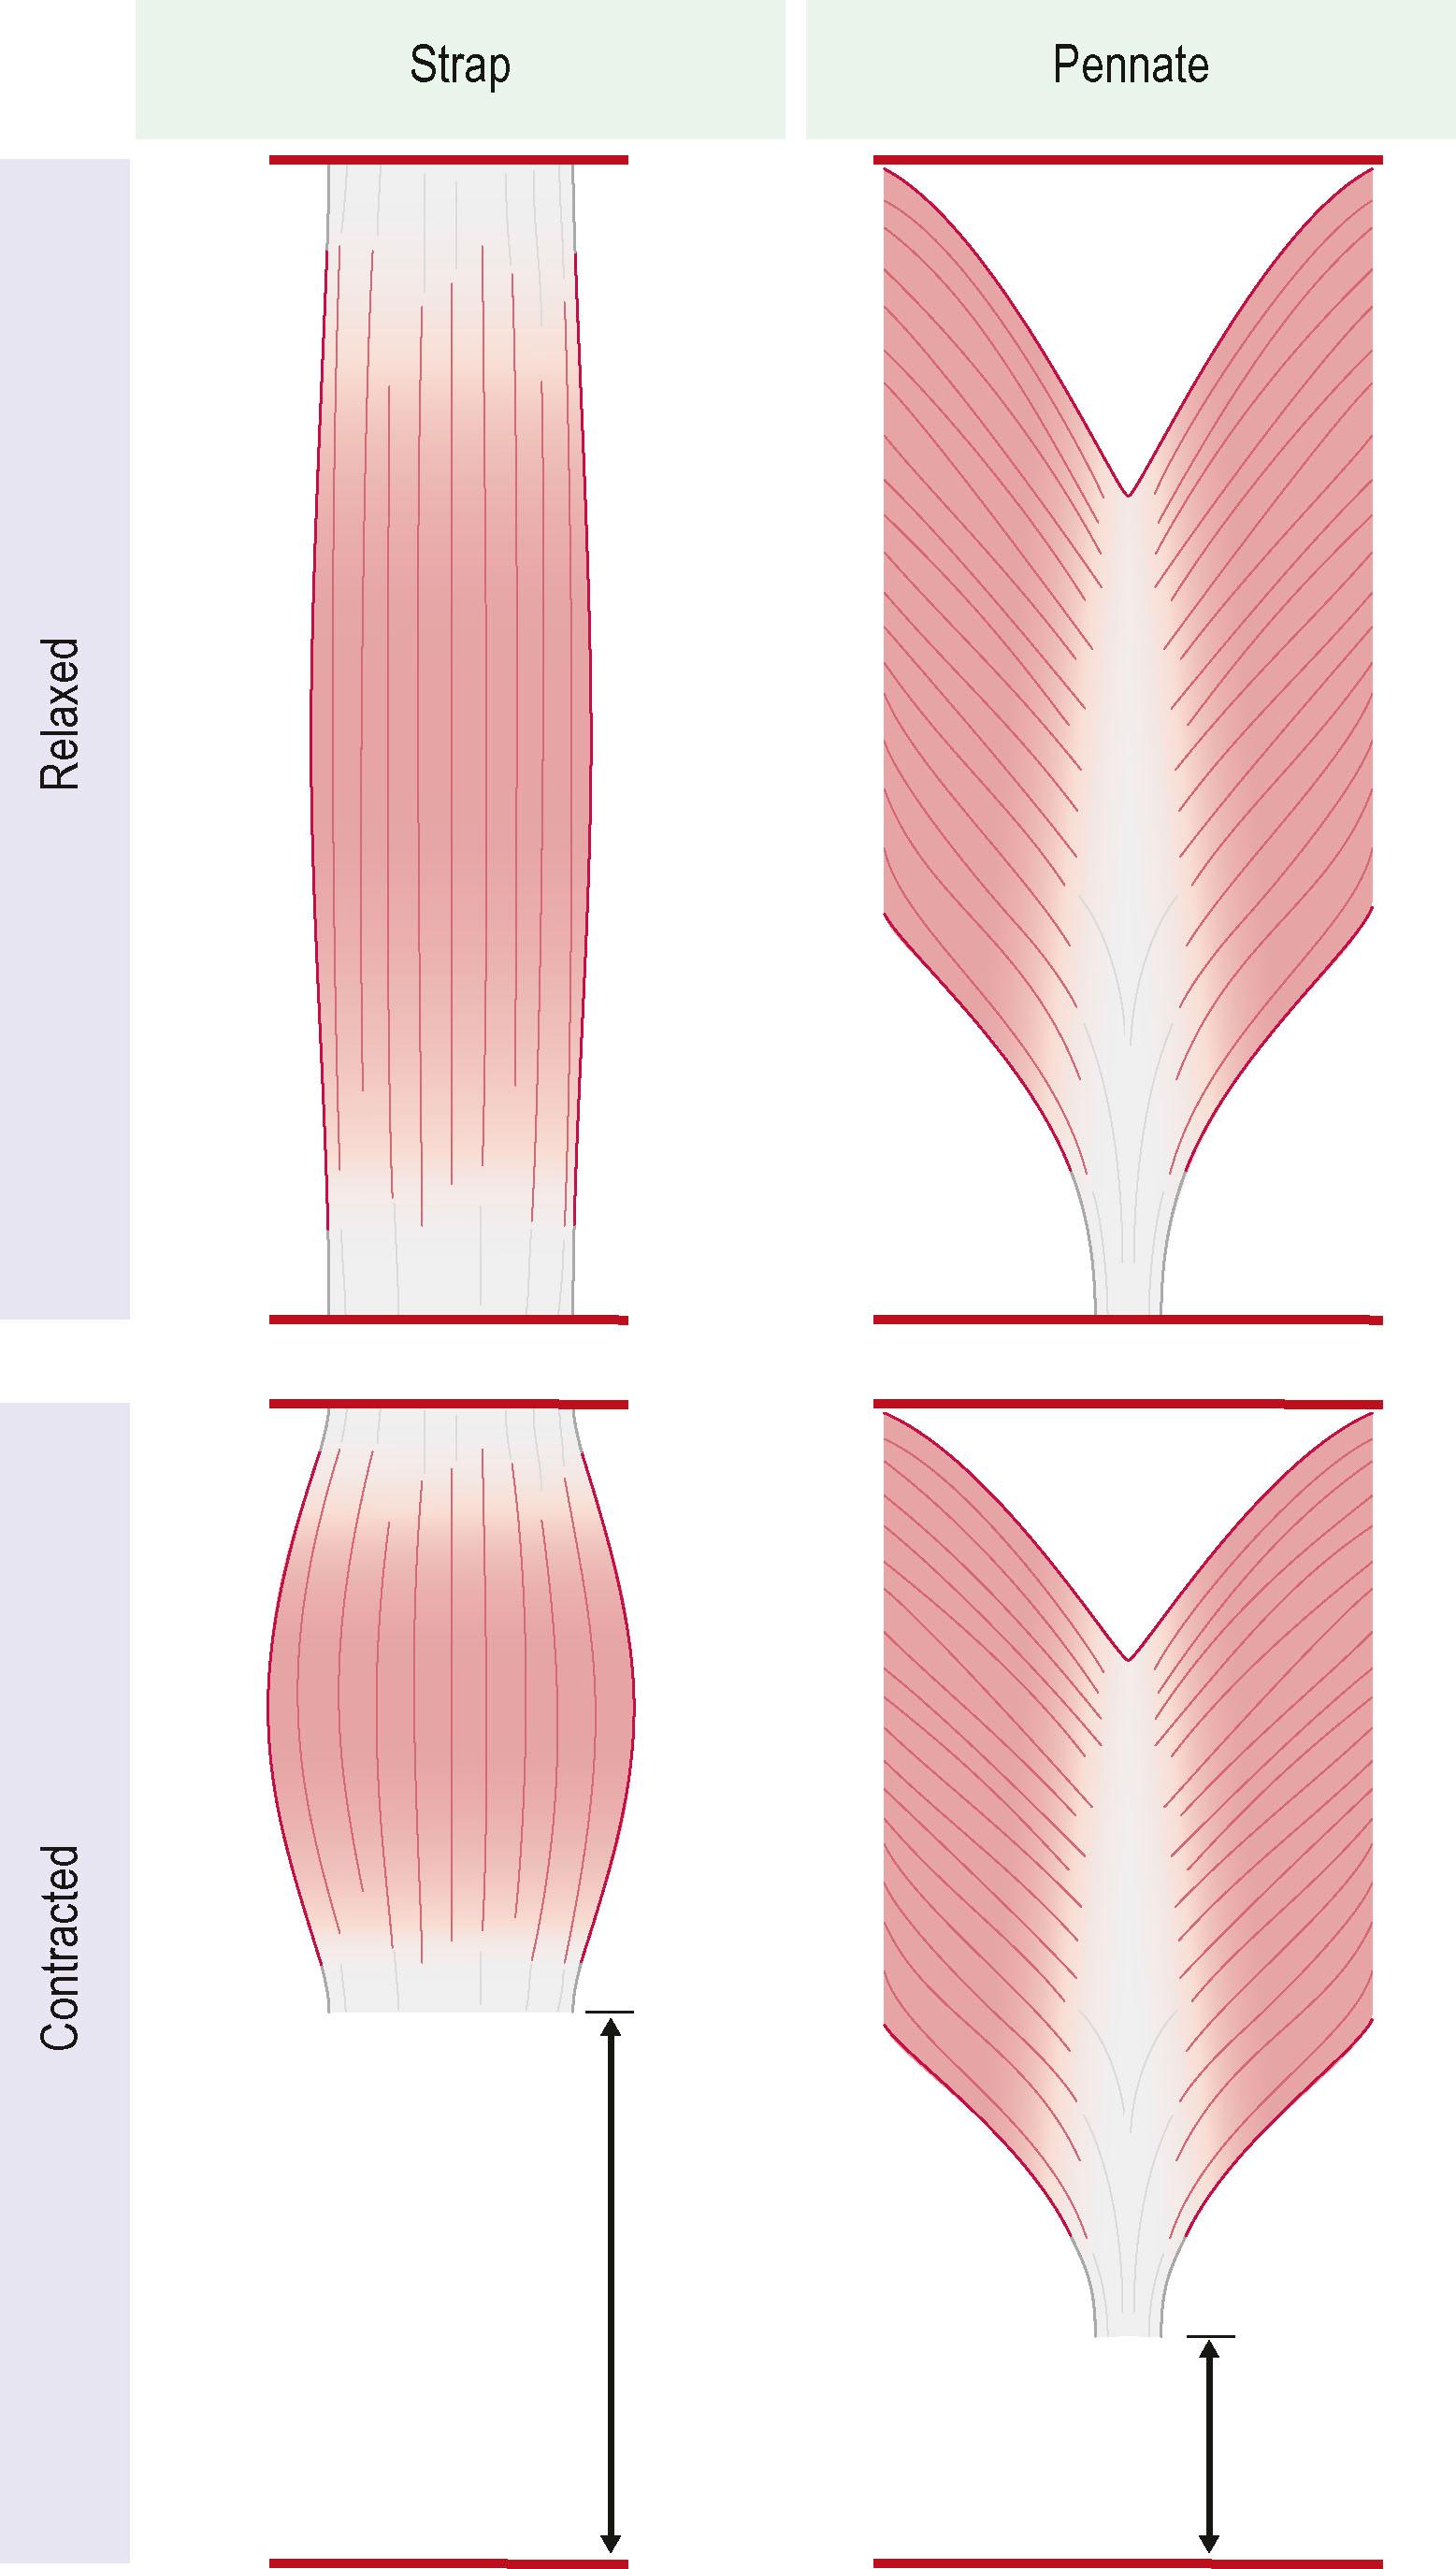 Figure 27.2, Strap and pennate muscles. In pennate muscle, the muscle fibers are arranged at an angle to a central tendon resulting is less excursion but creation of higher force during contraction.